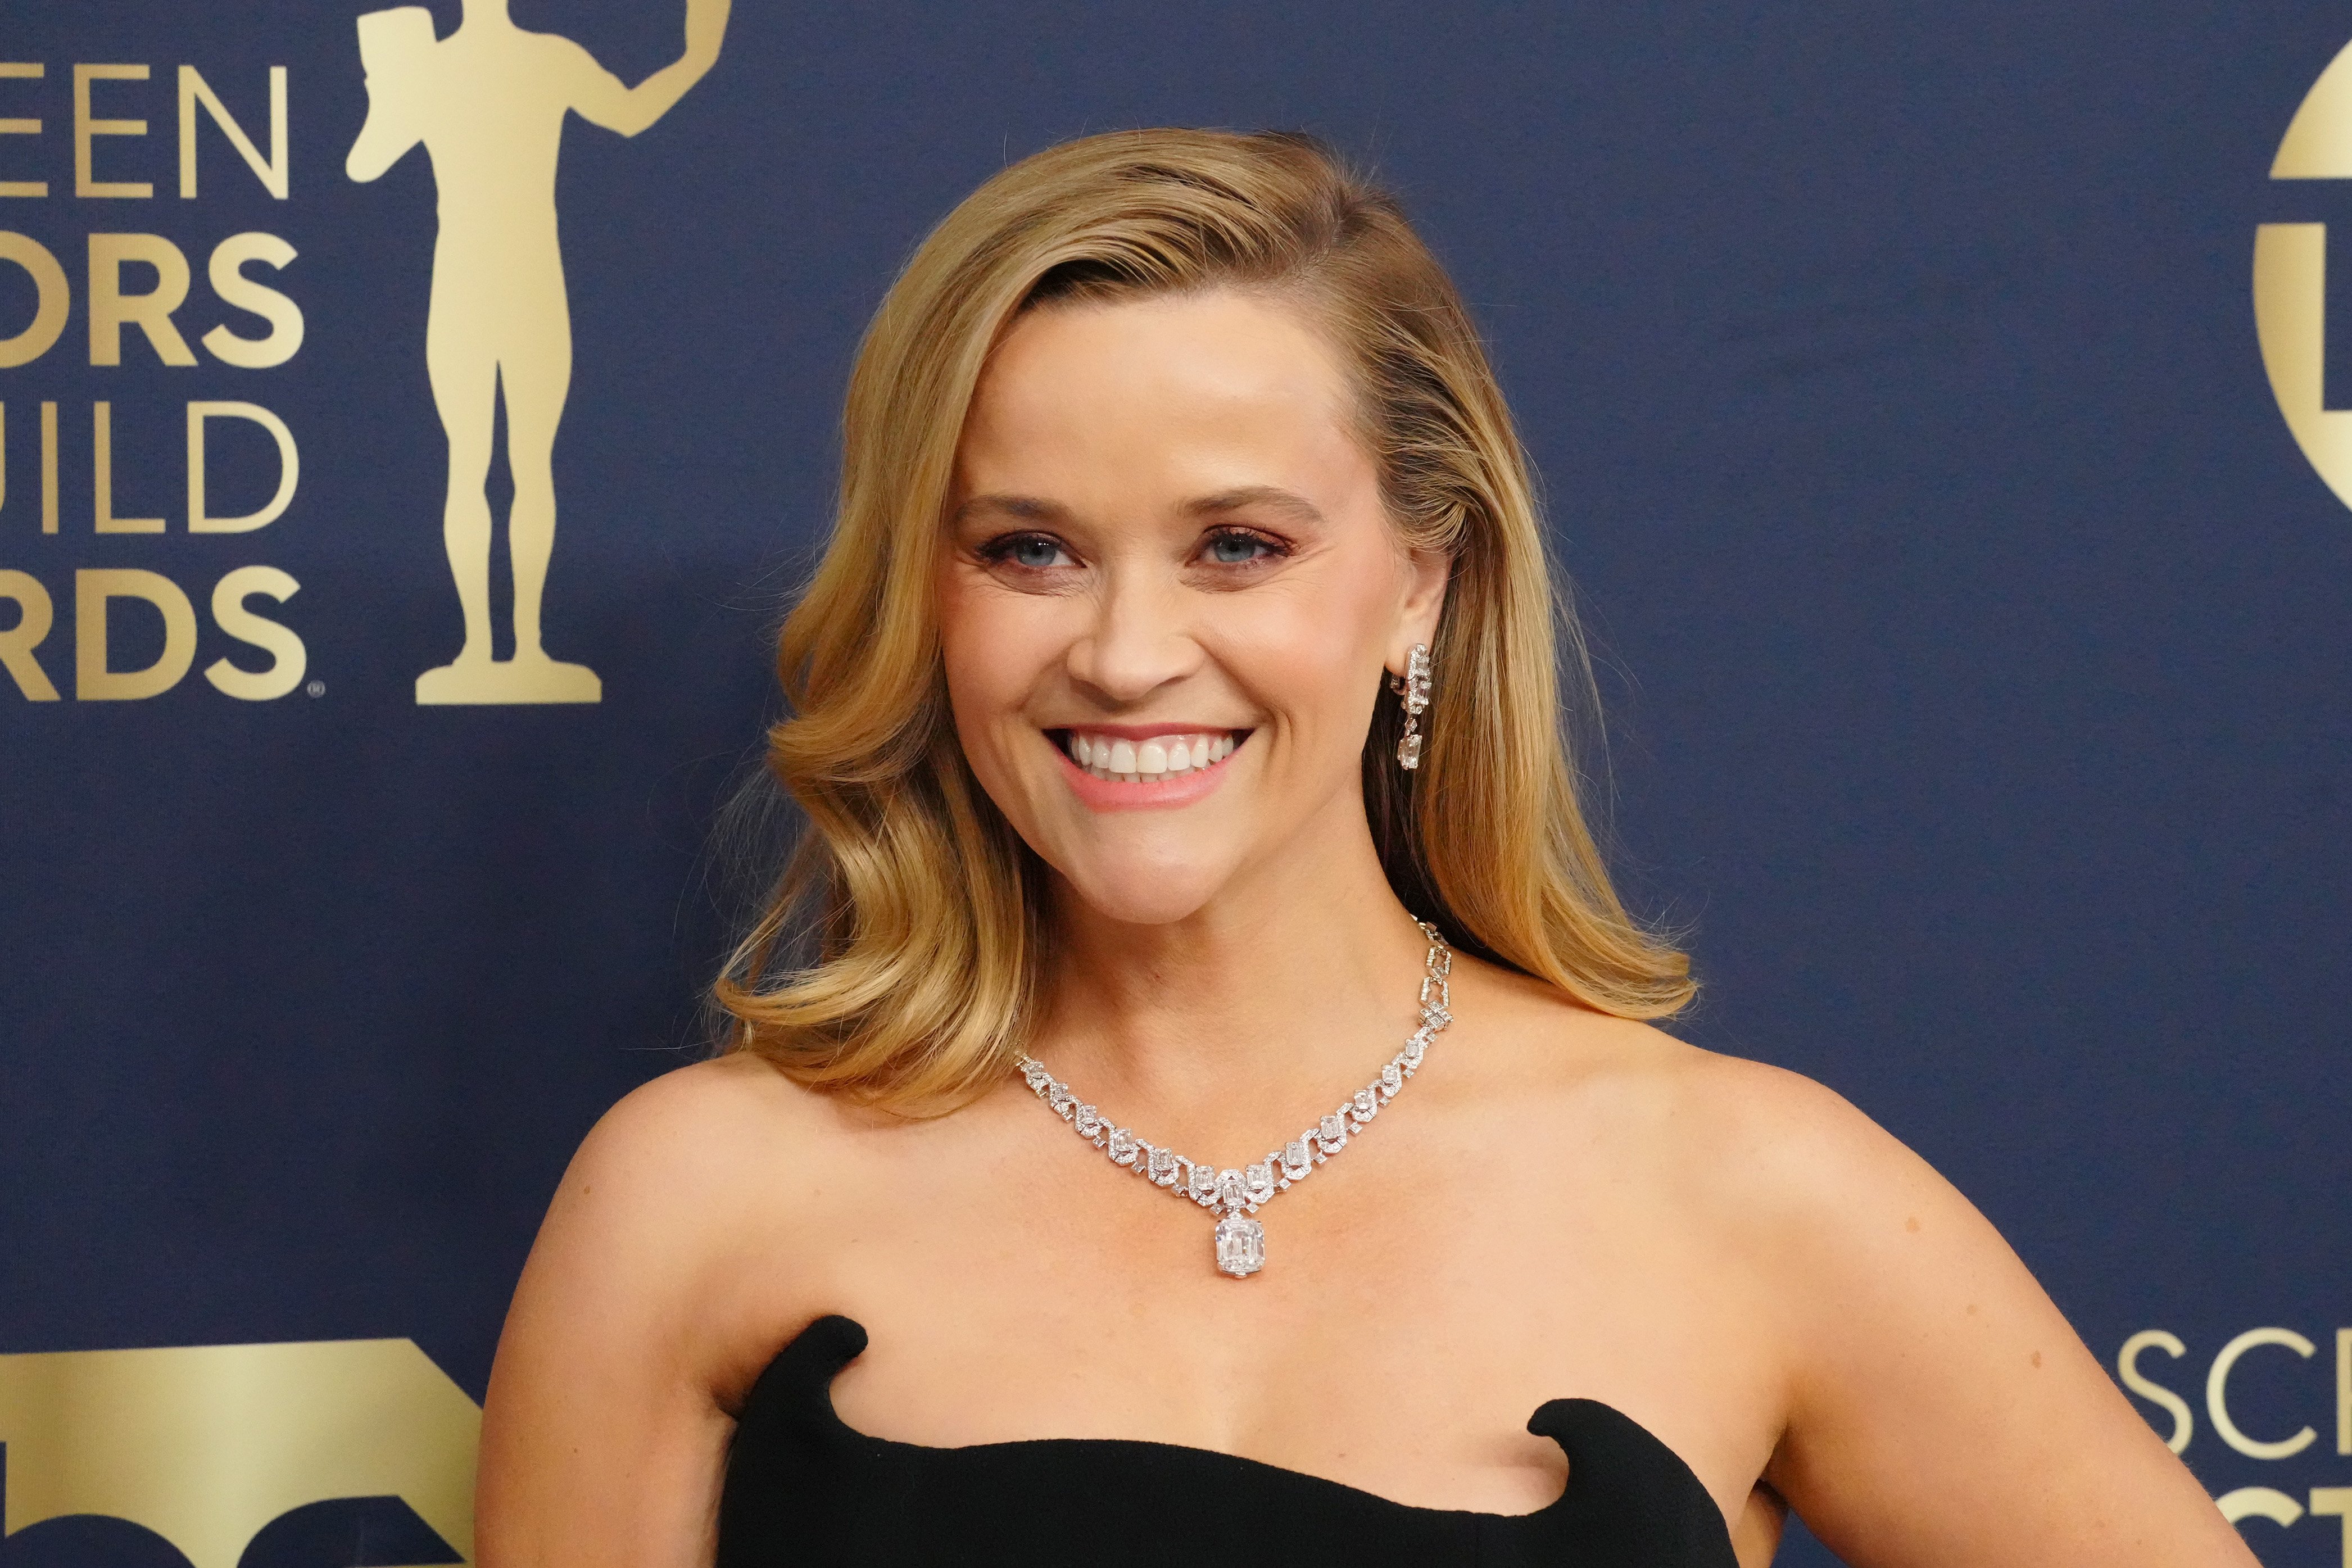 Reese Witherspoon at the 28th Annual Screen Actors Guild Awards on February 27, 2022 | Source: Getty Images